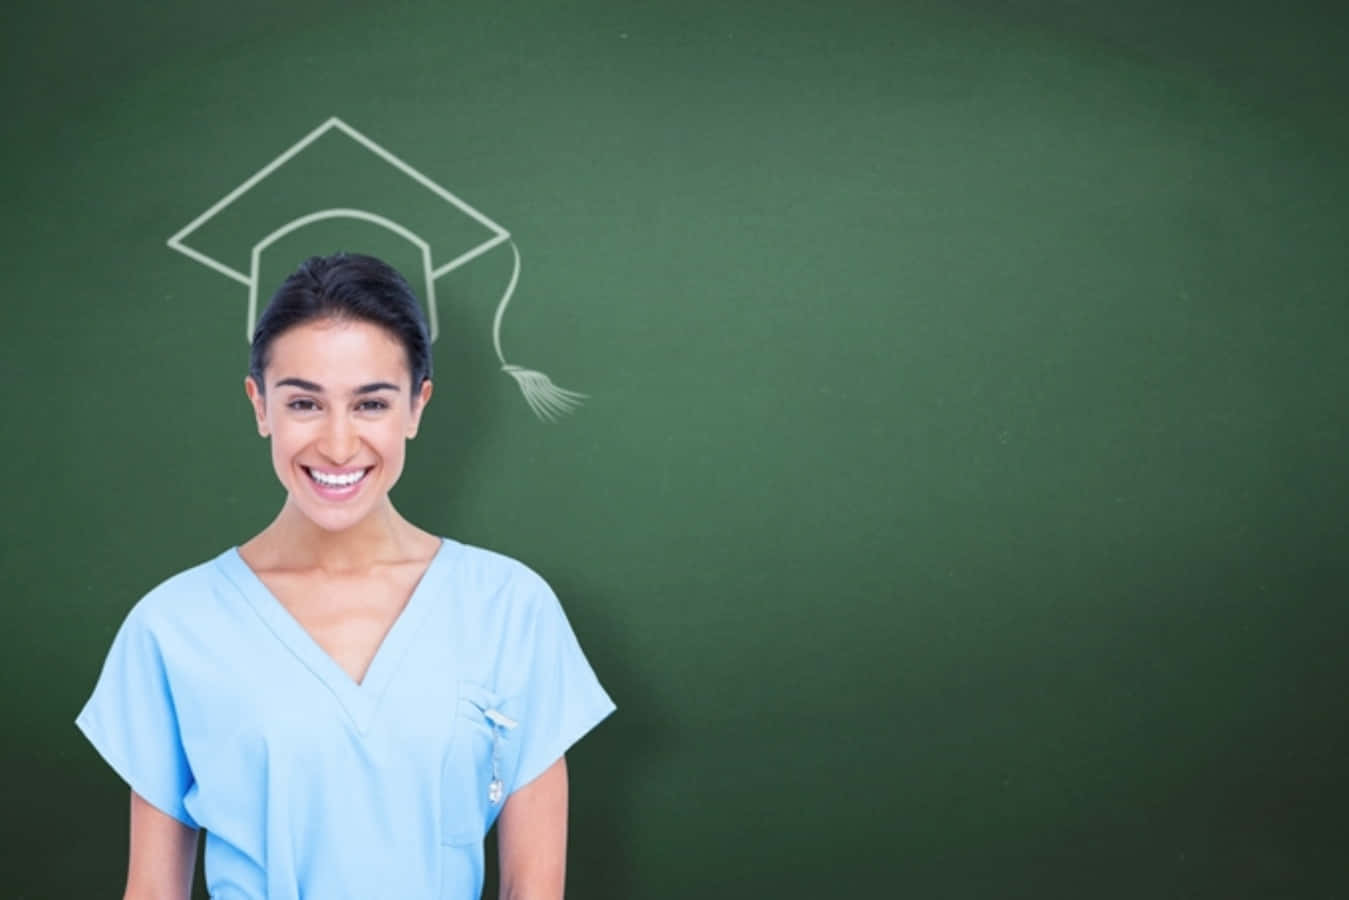 A Woman In Scrubs Standing In Front Of A Blackboard With A Graduation Cap